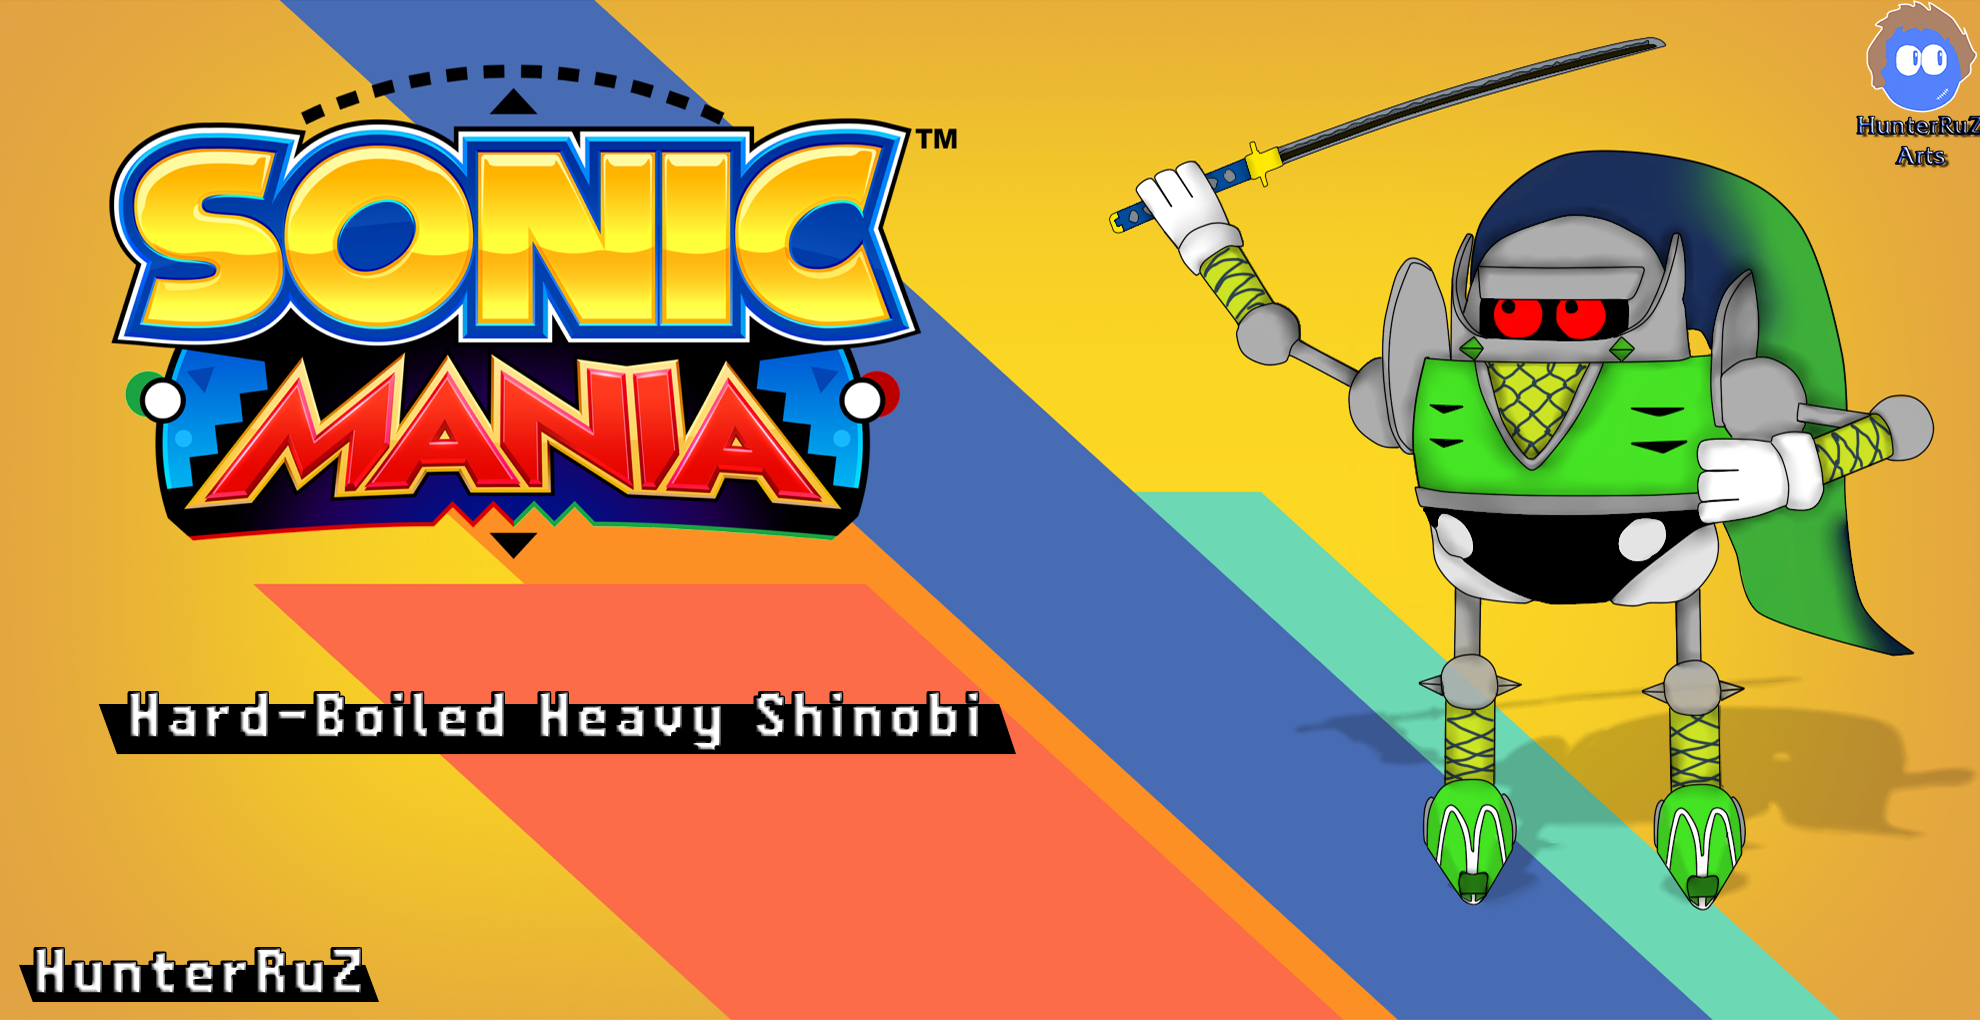 SONIC MANIA - Android Remake! (1080p/60fps) #HeavyWIP #FanProject